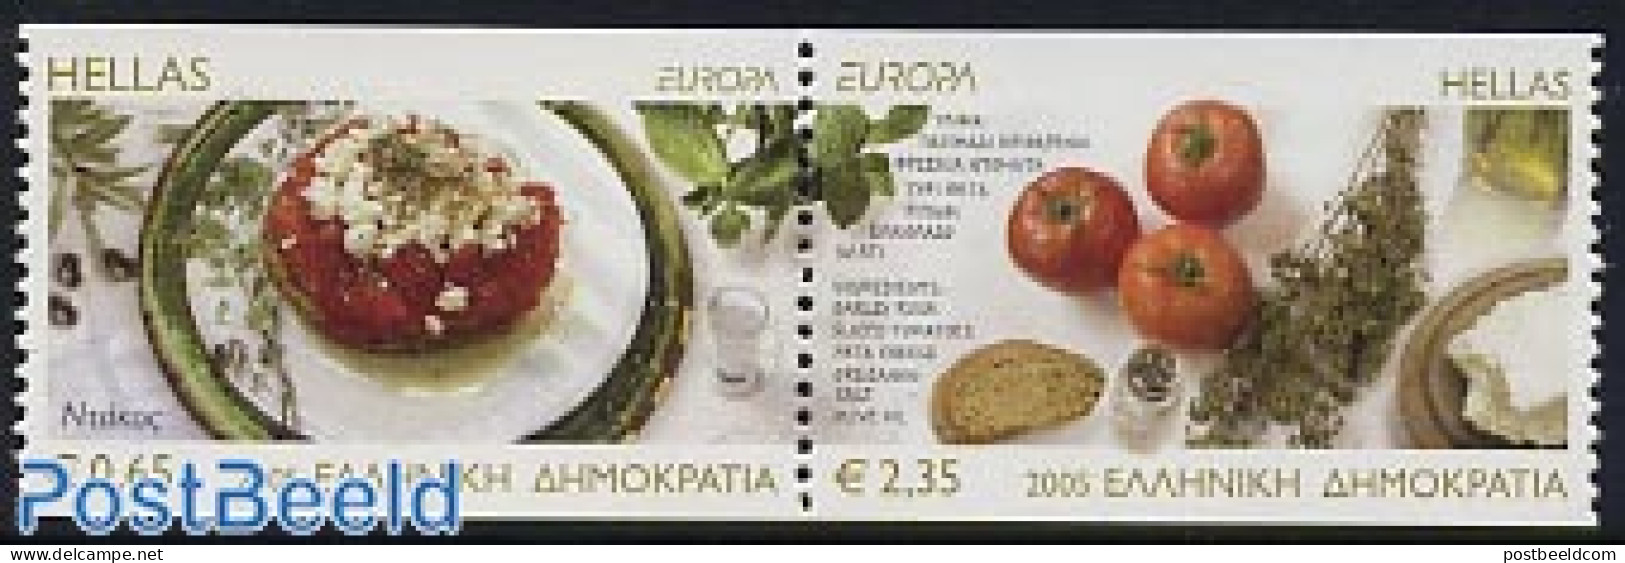 Greece 2005 Europa, Gastronomy 2v [:] From Booklets, Mint NH, Health - History - Food & Drink - Europa (cept) - Ungebraucht